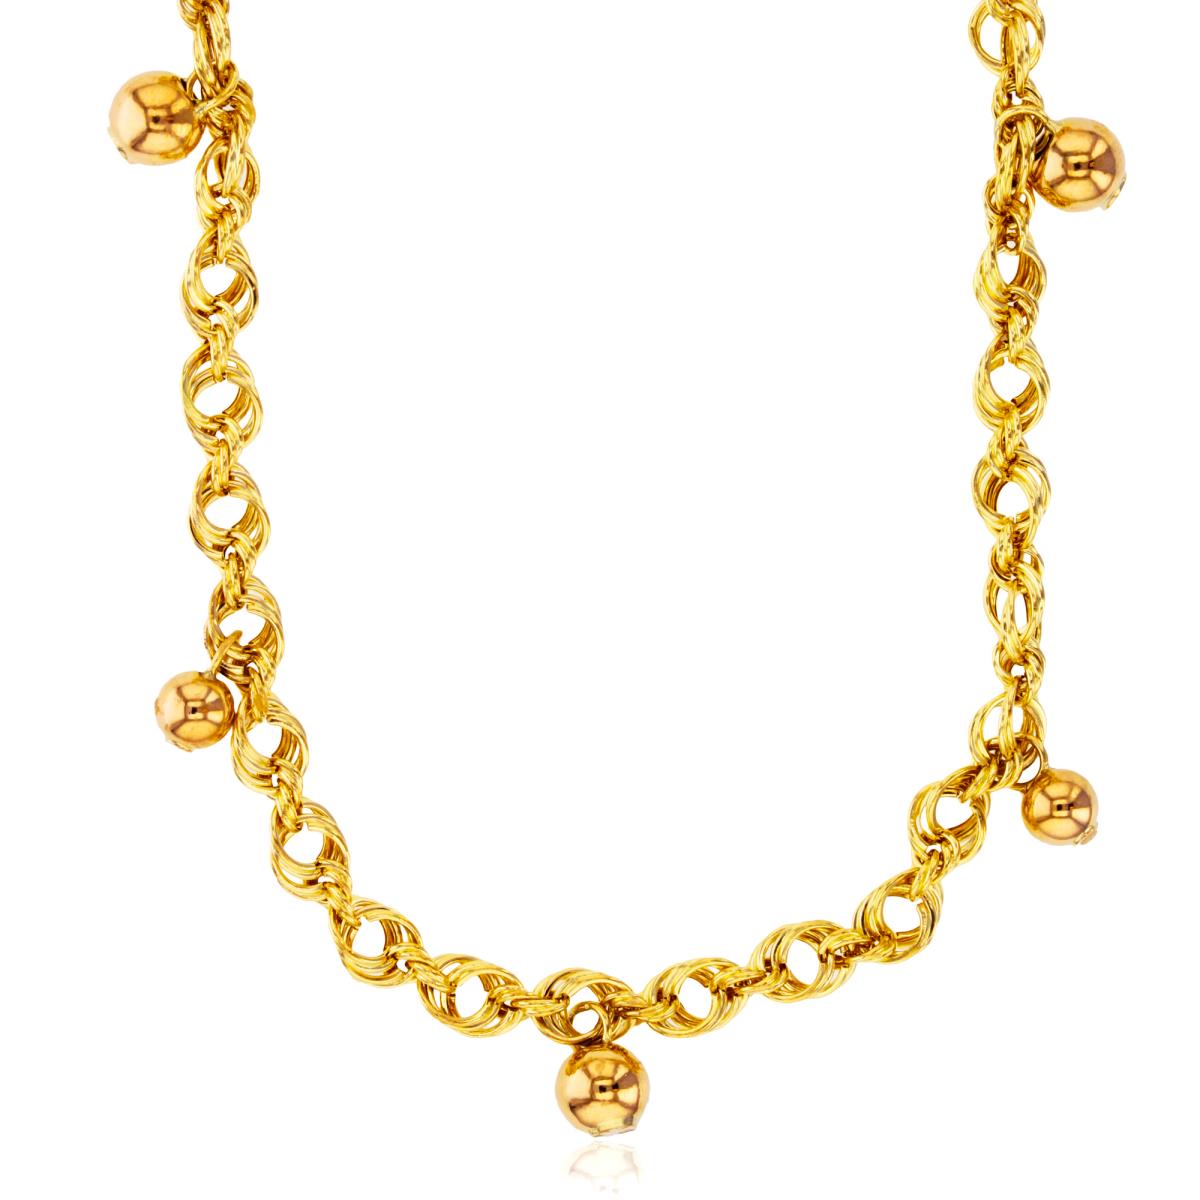 10K Yellow Gold Fancy Rope with 6mm Dangling Beads 18" Chain